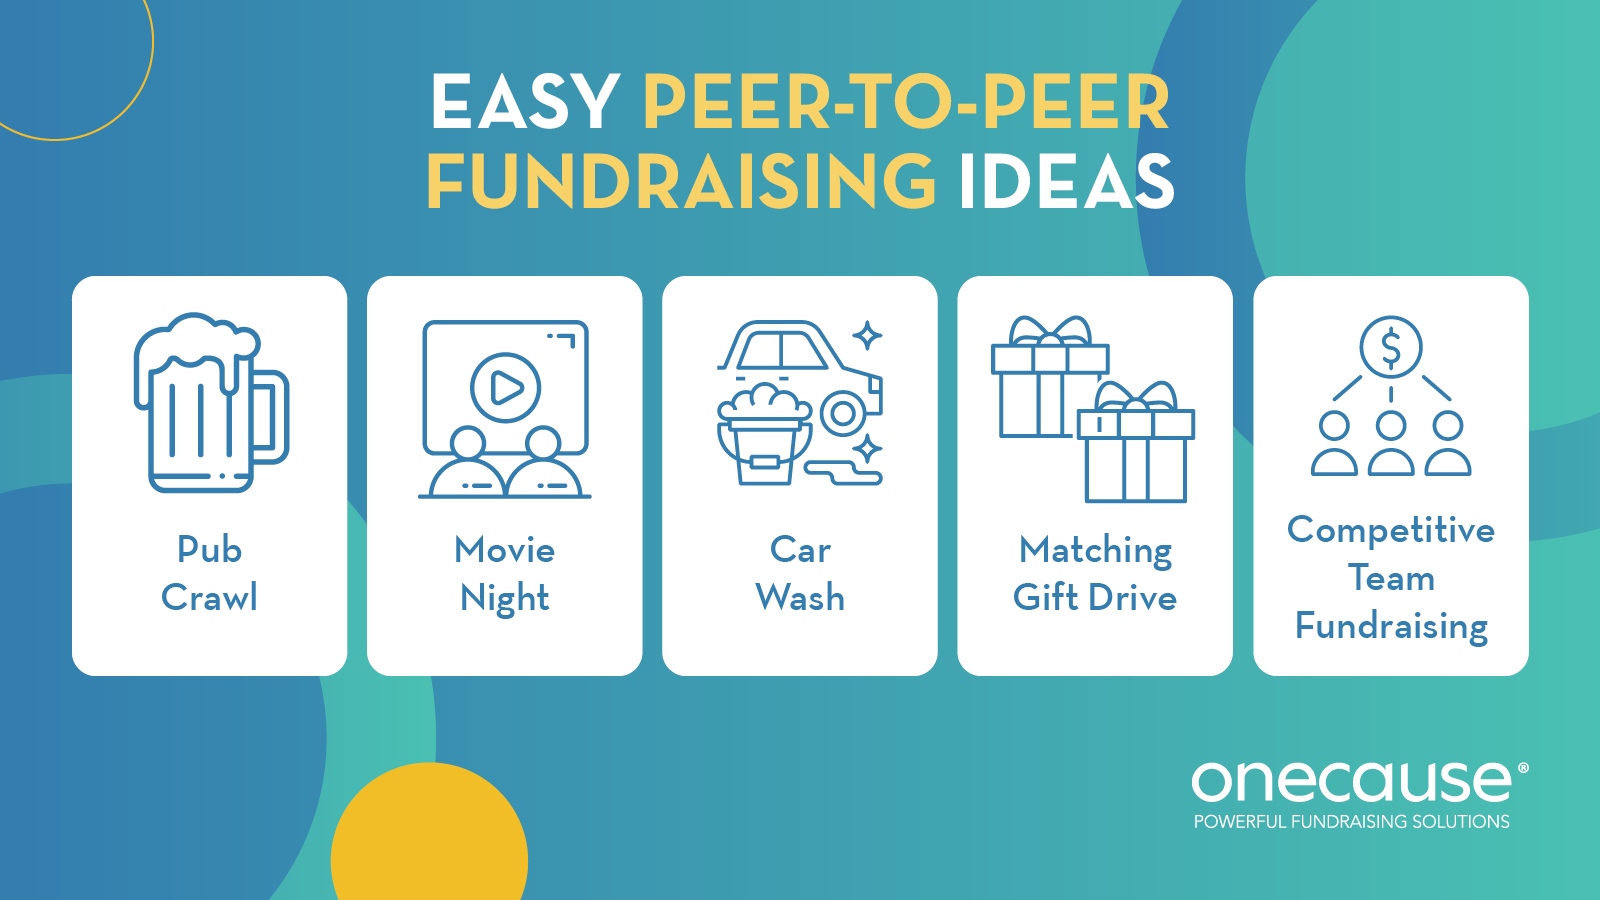 This image lists easy peer-to-peer fundraising ideas, also covered in the text below.